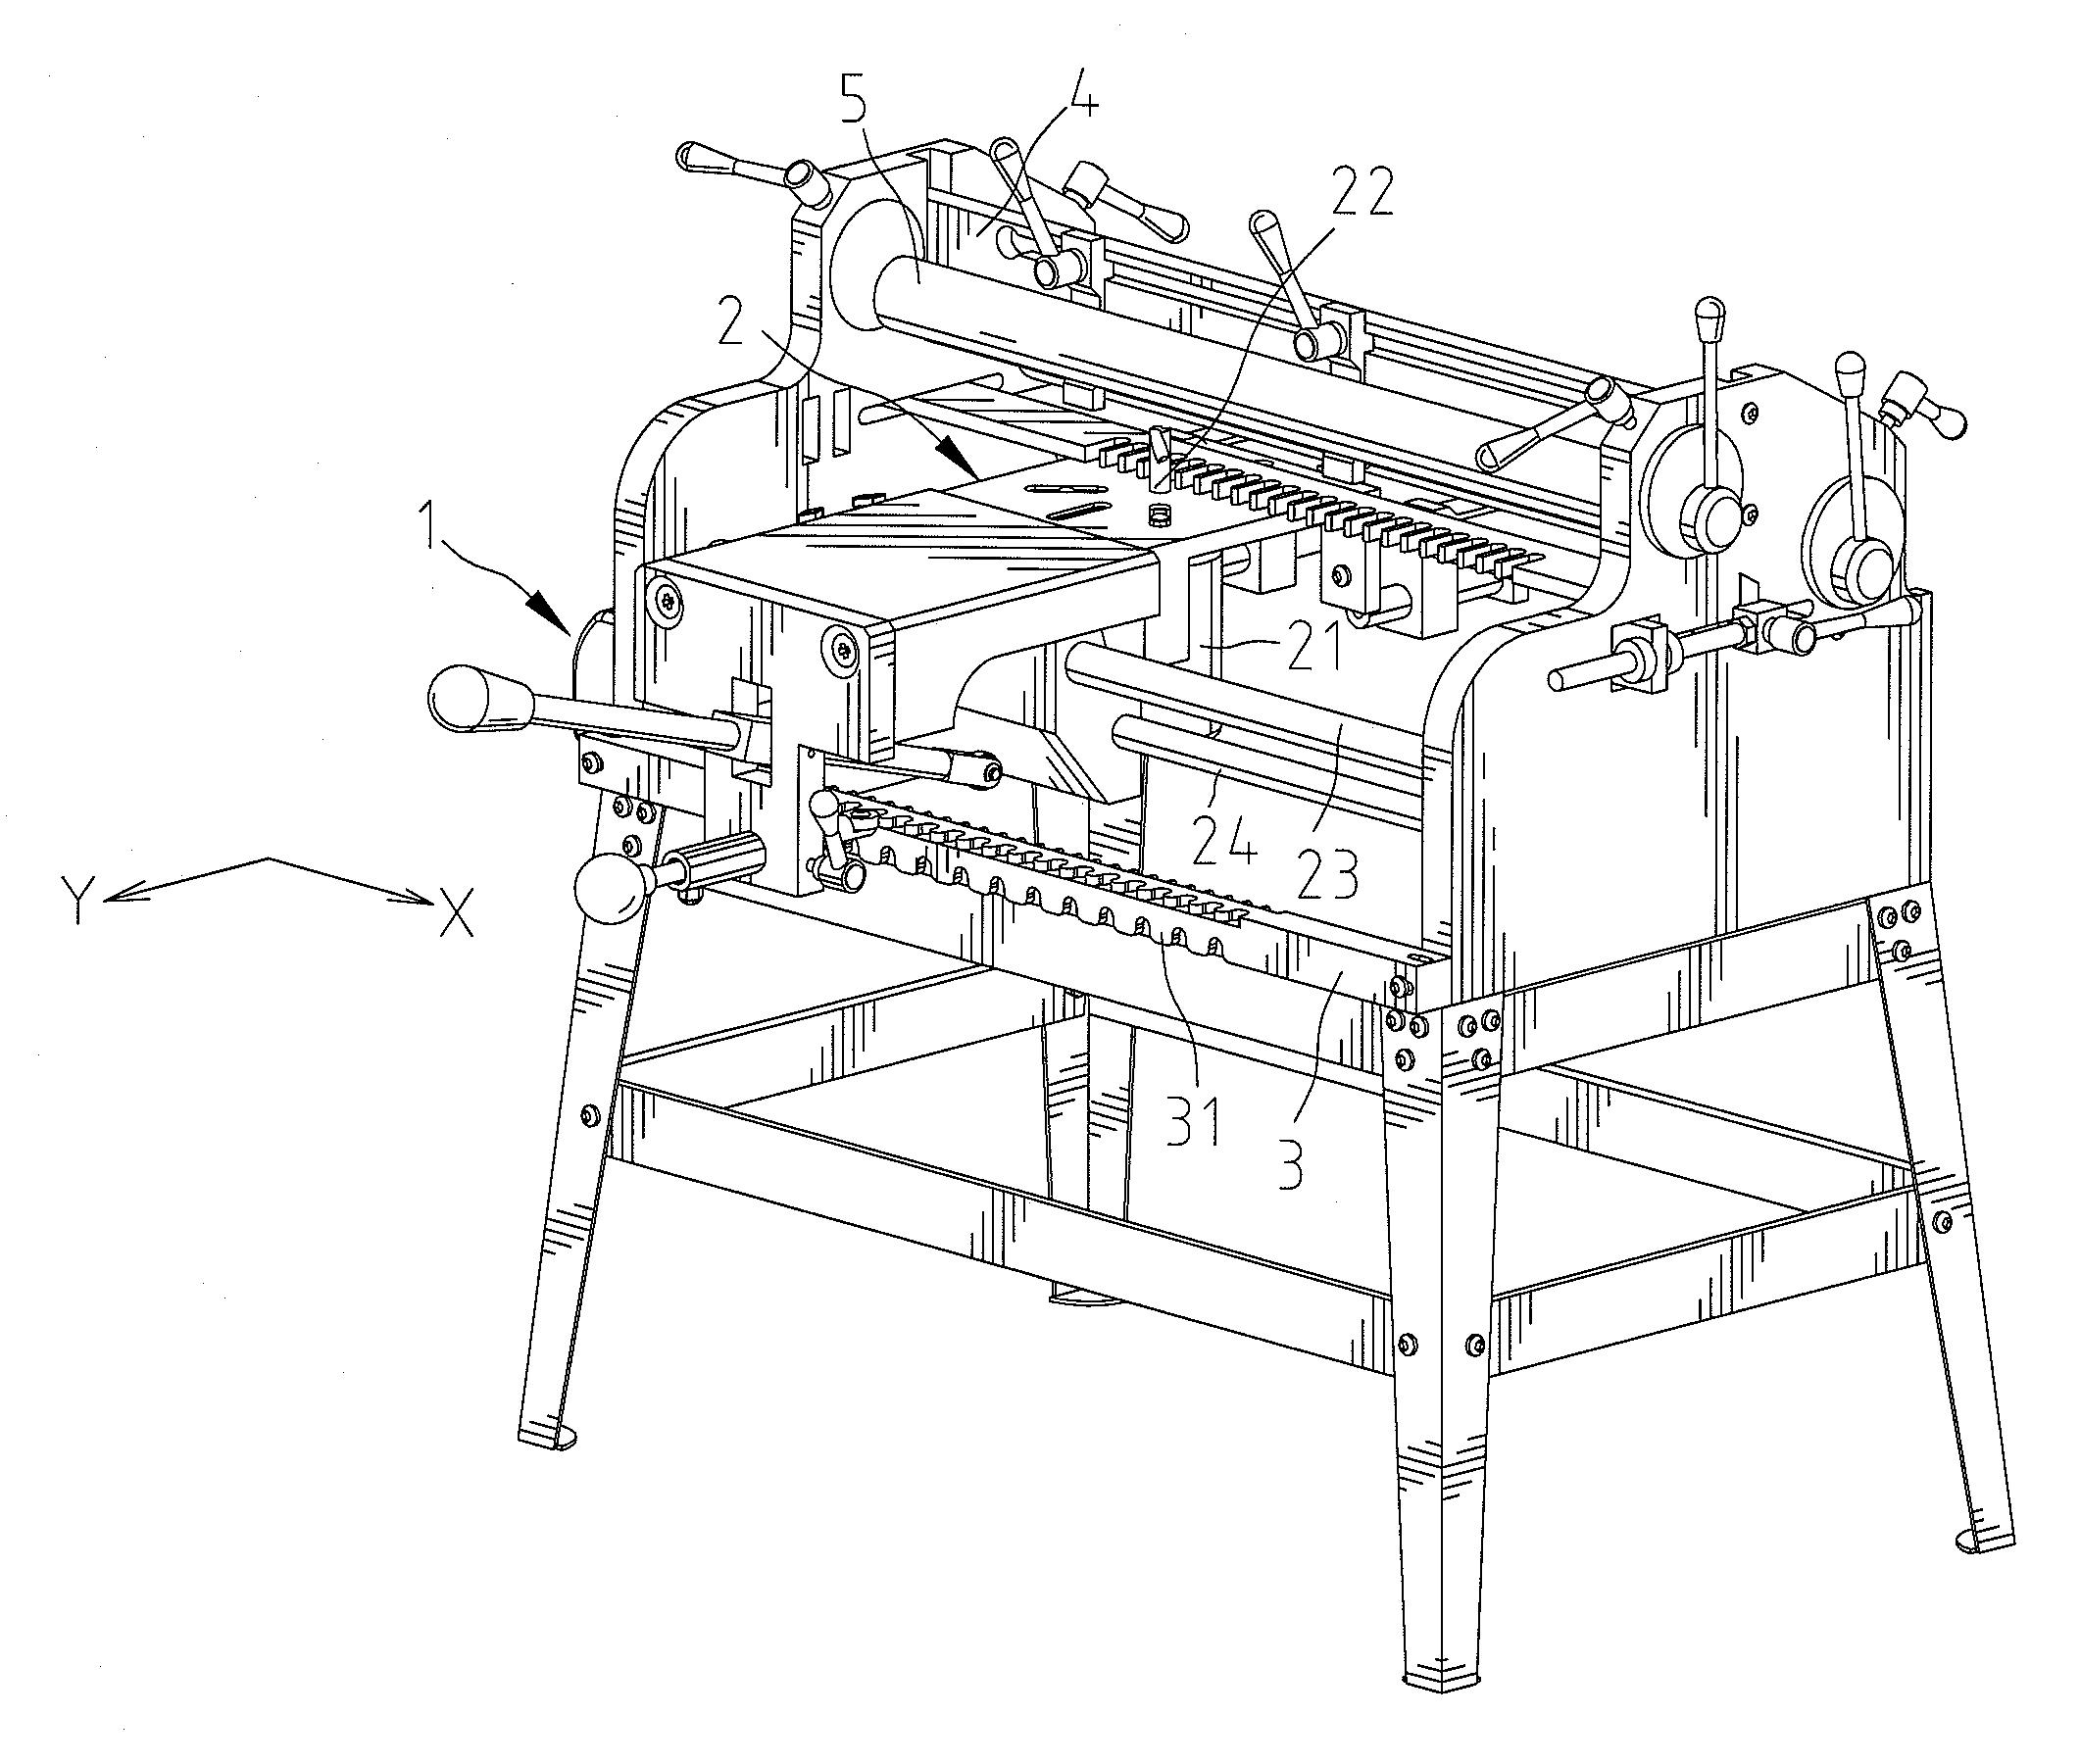 Operation Device for Quick and Accurate Control of Working Device of Tenoner